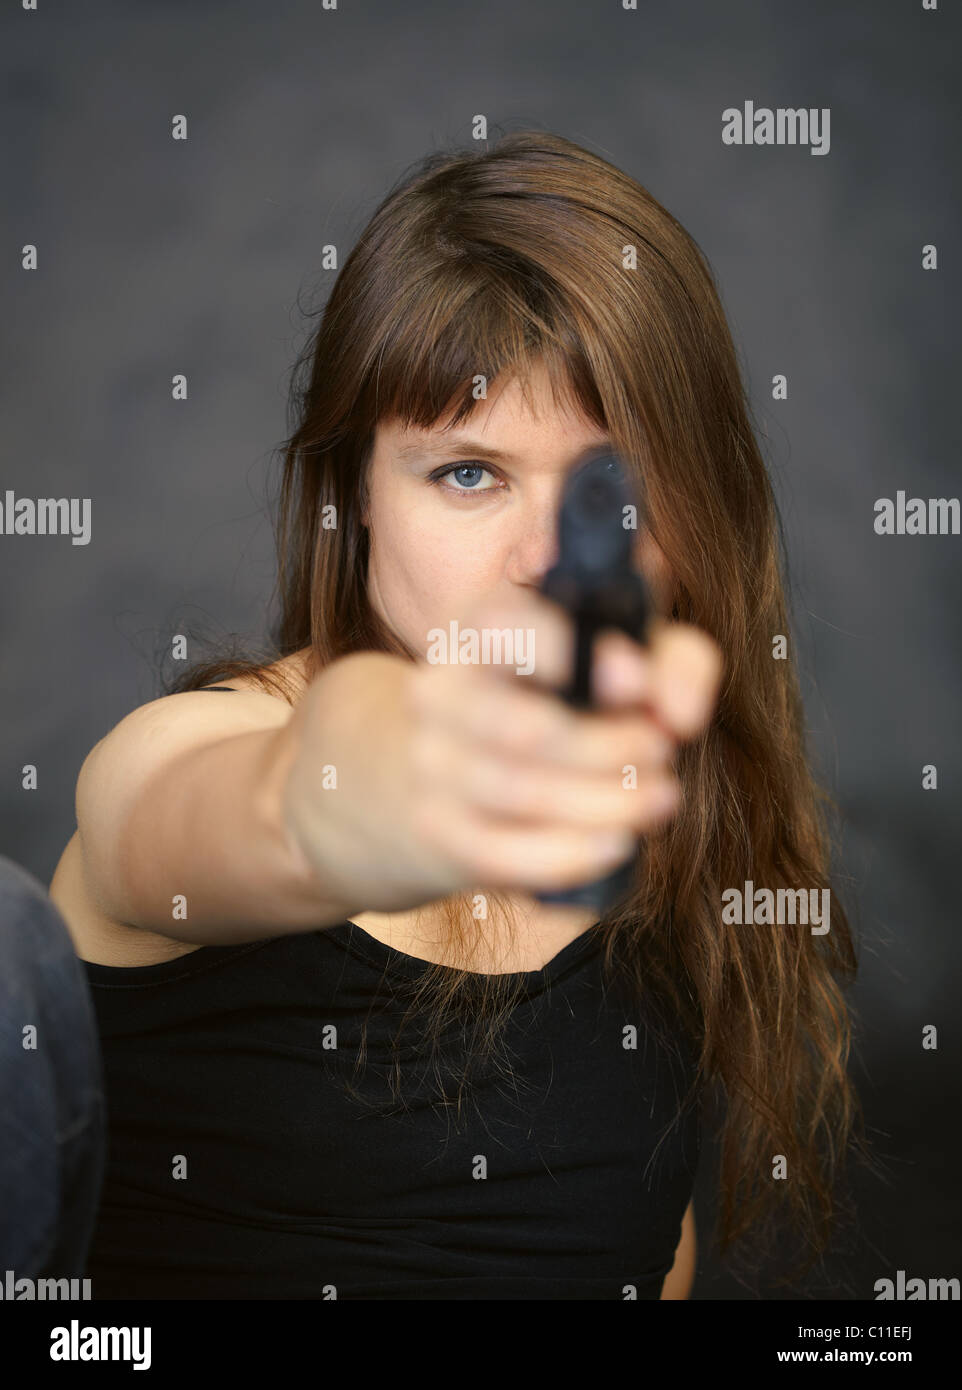 Woman aiming in enemy from pistol Stock Photo